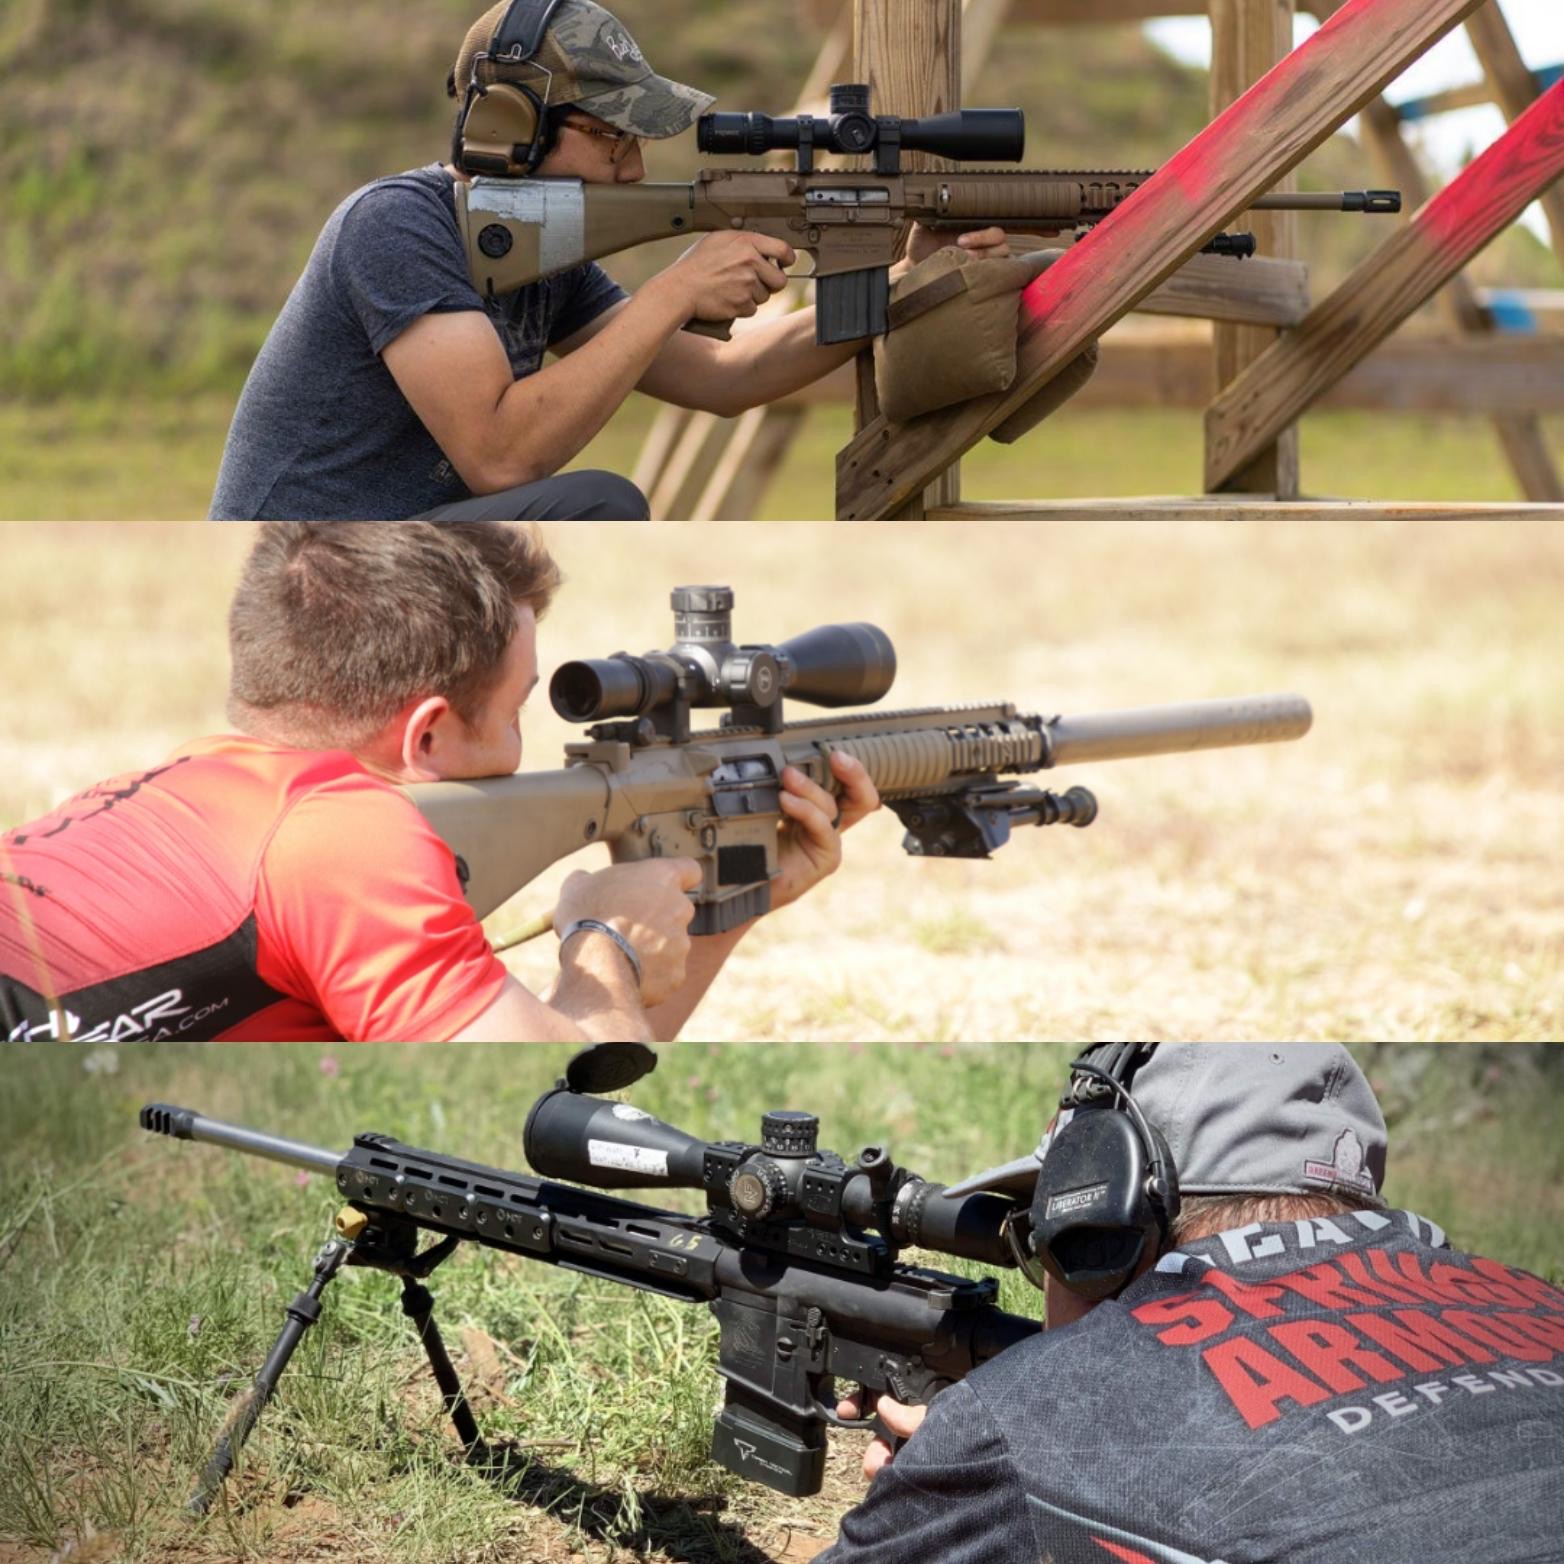 SASS configurations are a common sight at PRS gas gun and other long range competitive events like "A Weekend at the Arena" match by Quantified Performance, owing to their precision capability at distance.